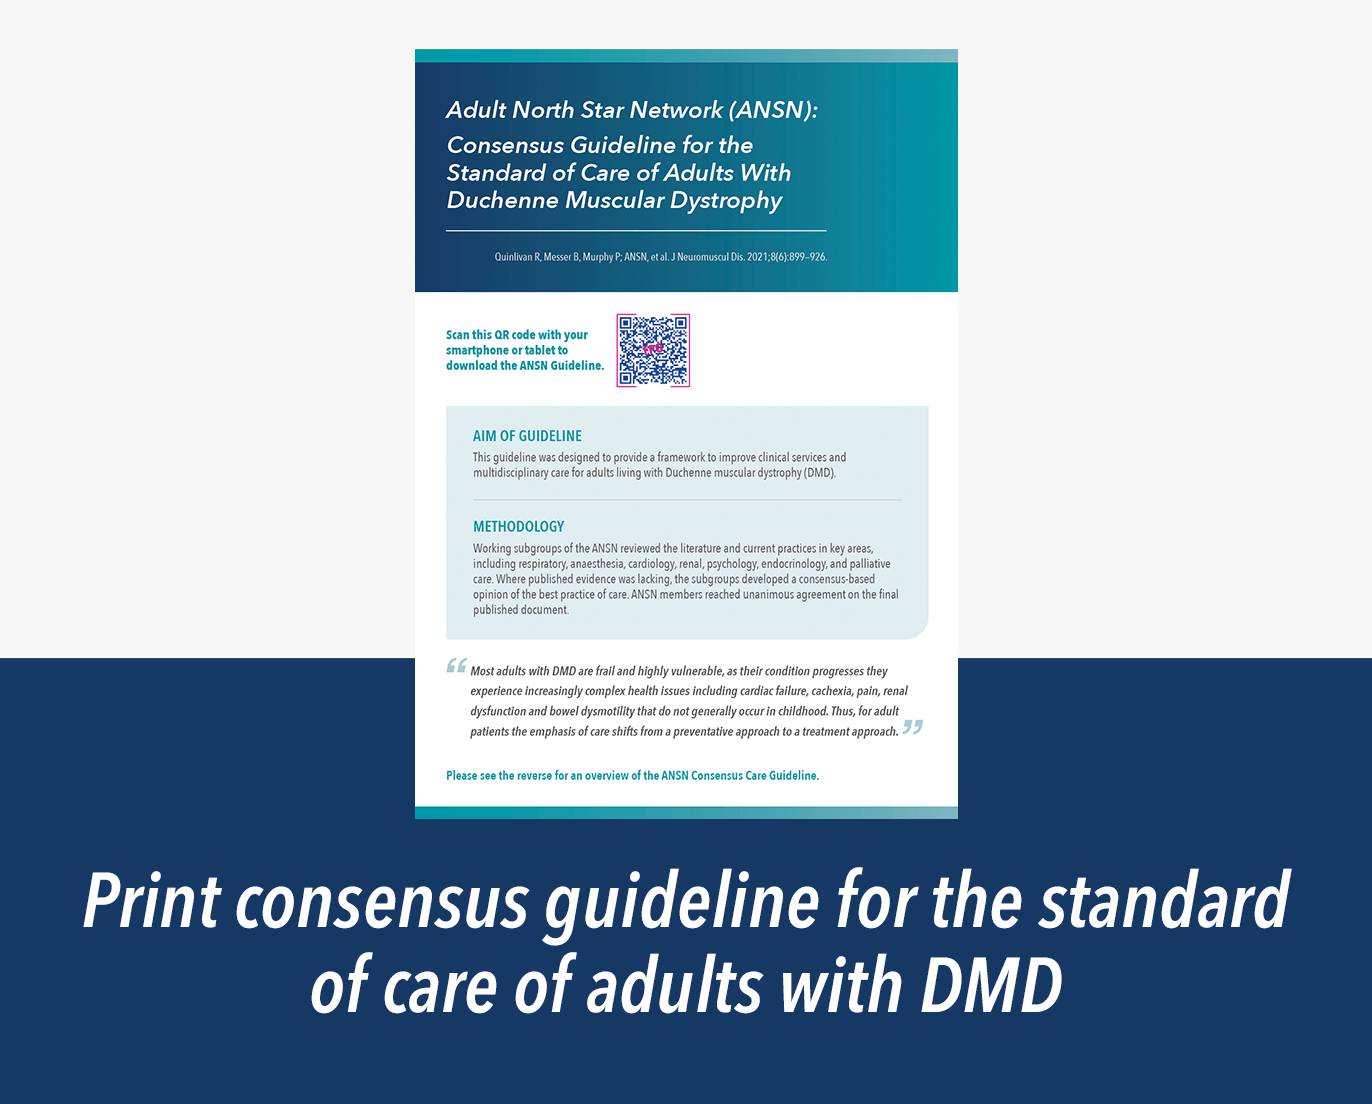 Image showing the front cover of the print consensus guidelines for the standard of care of adults with DMD booklet